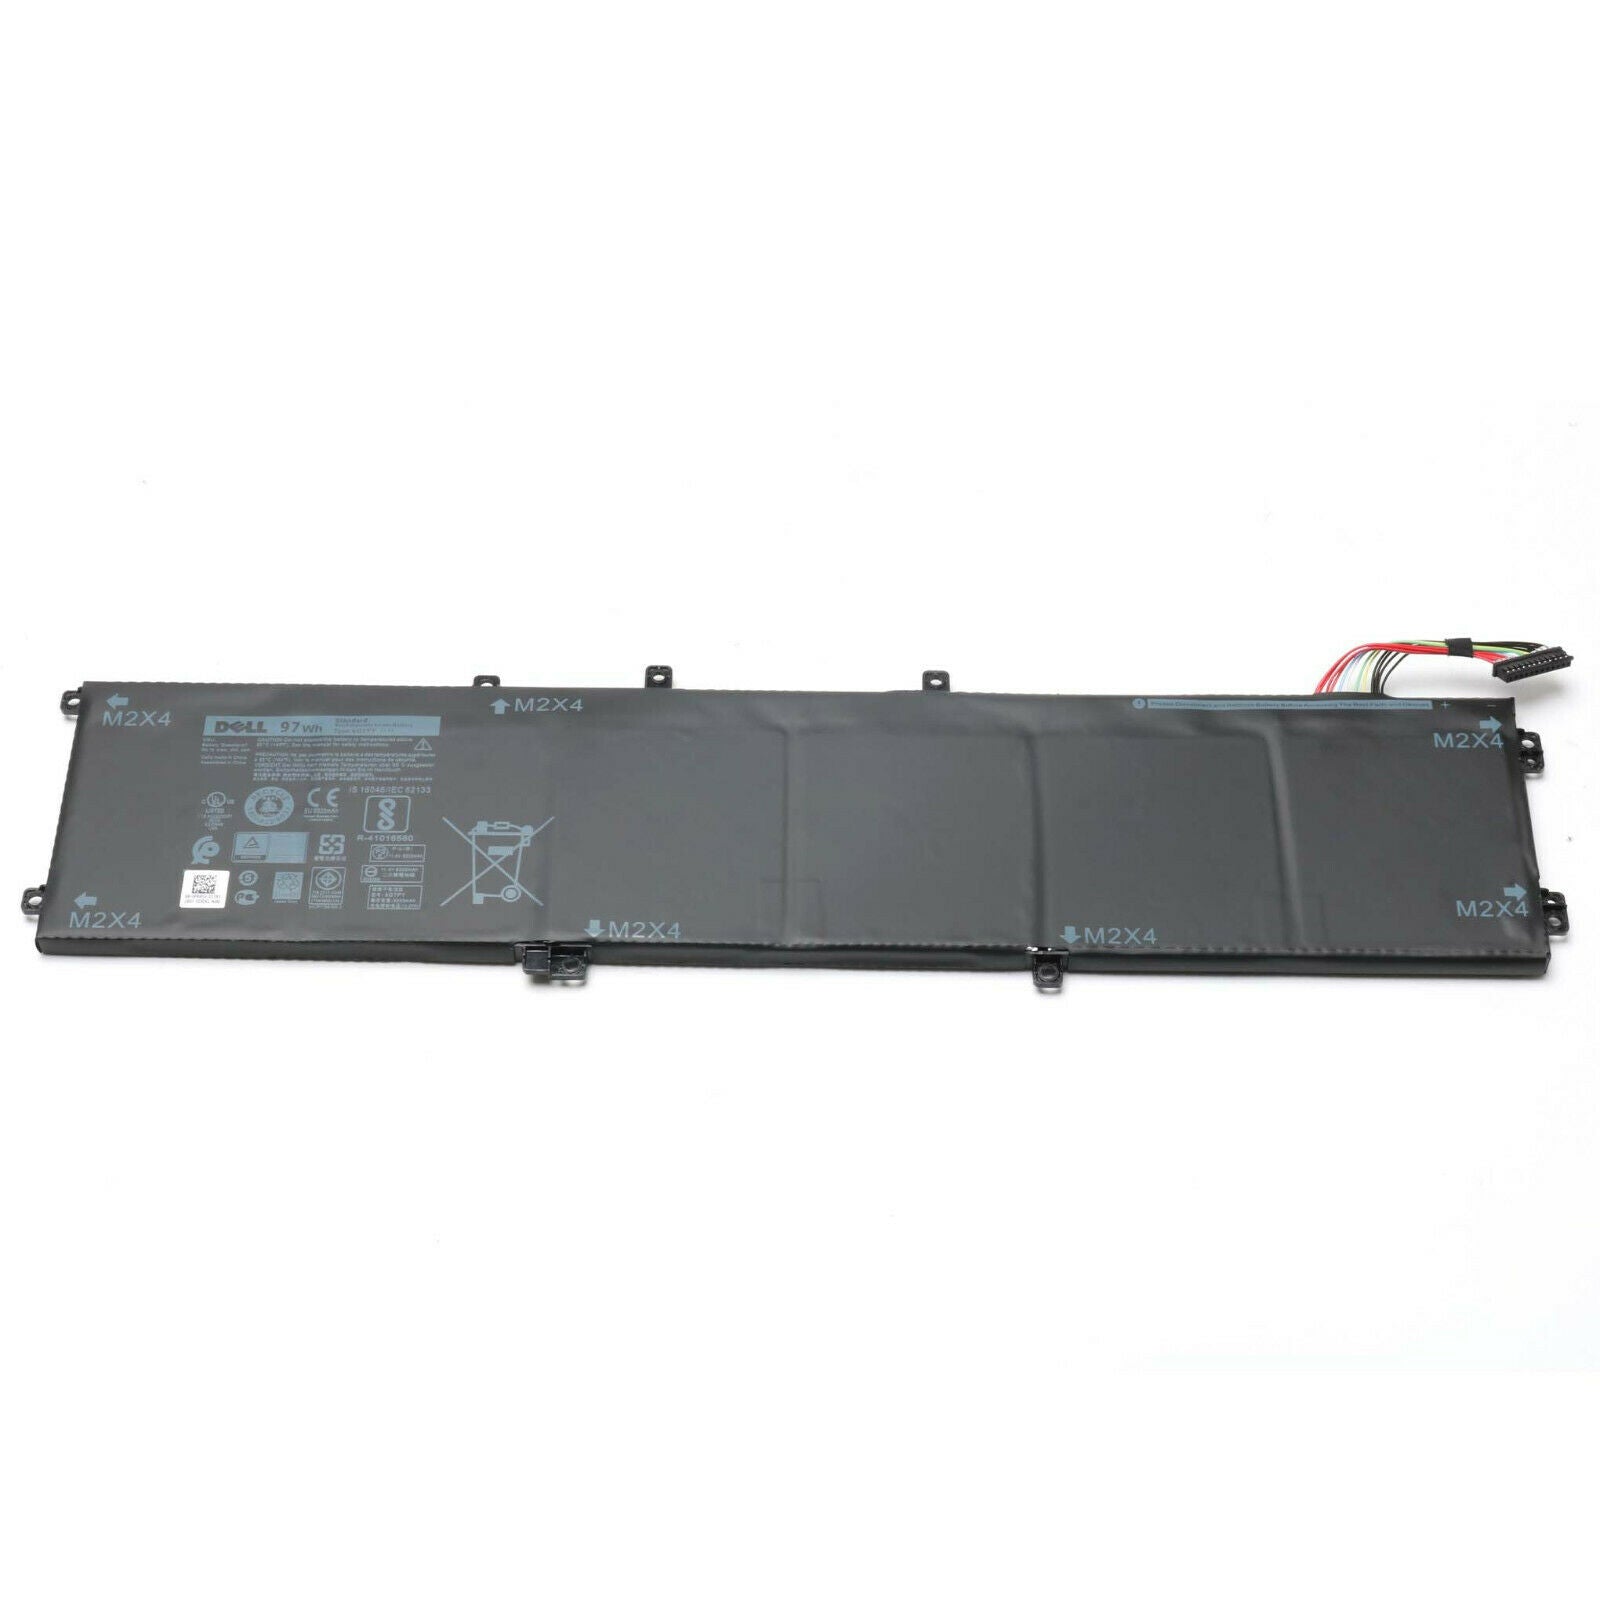 Dell XPS 15 9550, XPS 15 9570, 11.4V 97Wh Precision 5510, 5520, Inspiron 15 7590, 6GTPY Replacement Laptop Battery - JS Bazar